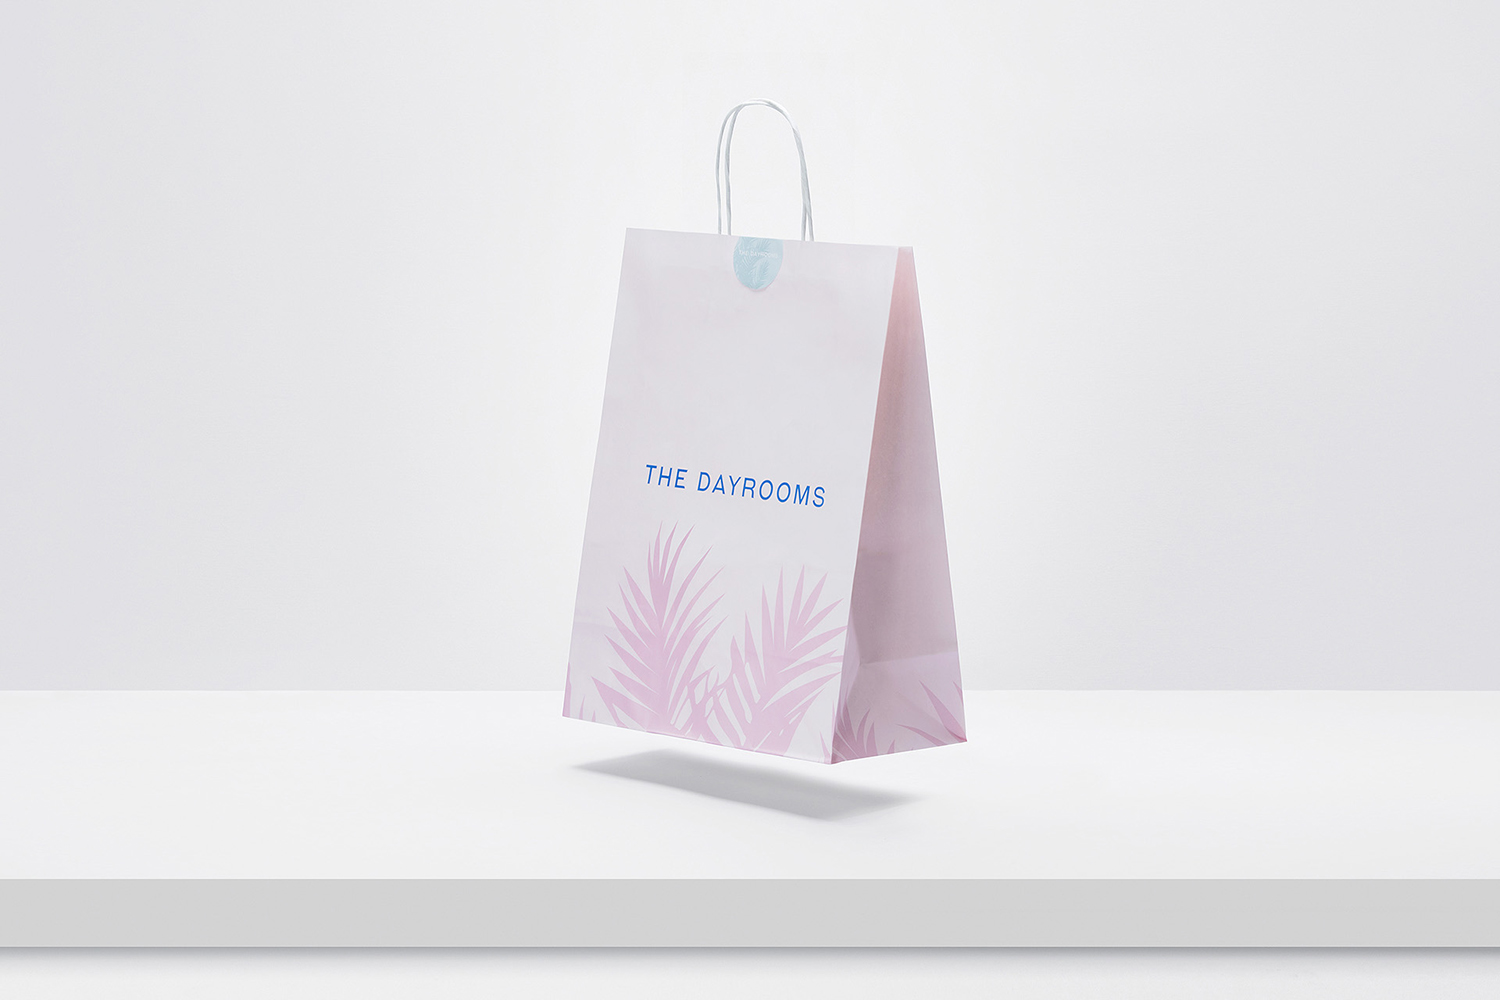 Branded takeaway bag for The Dayrooms Cafe designed by Two Times Elliott